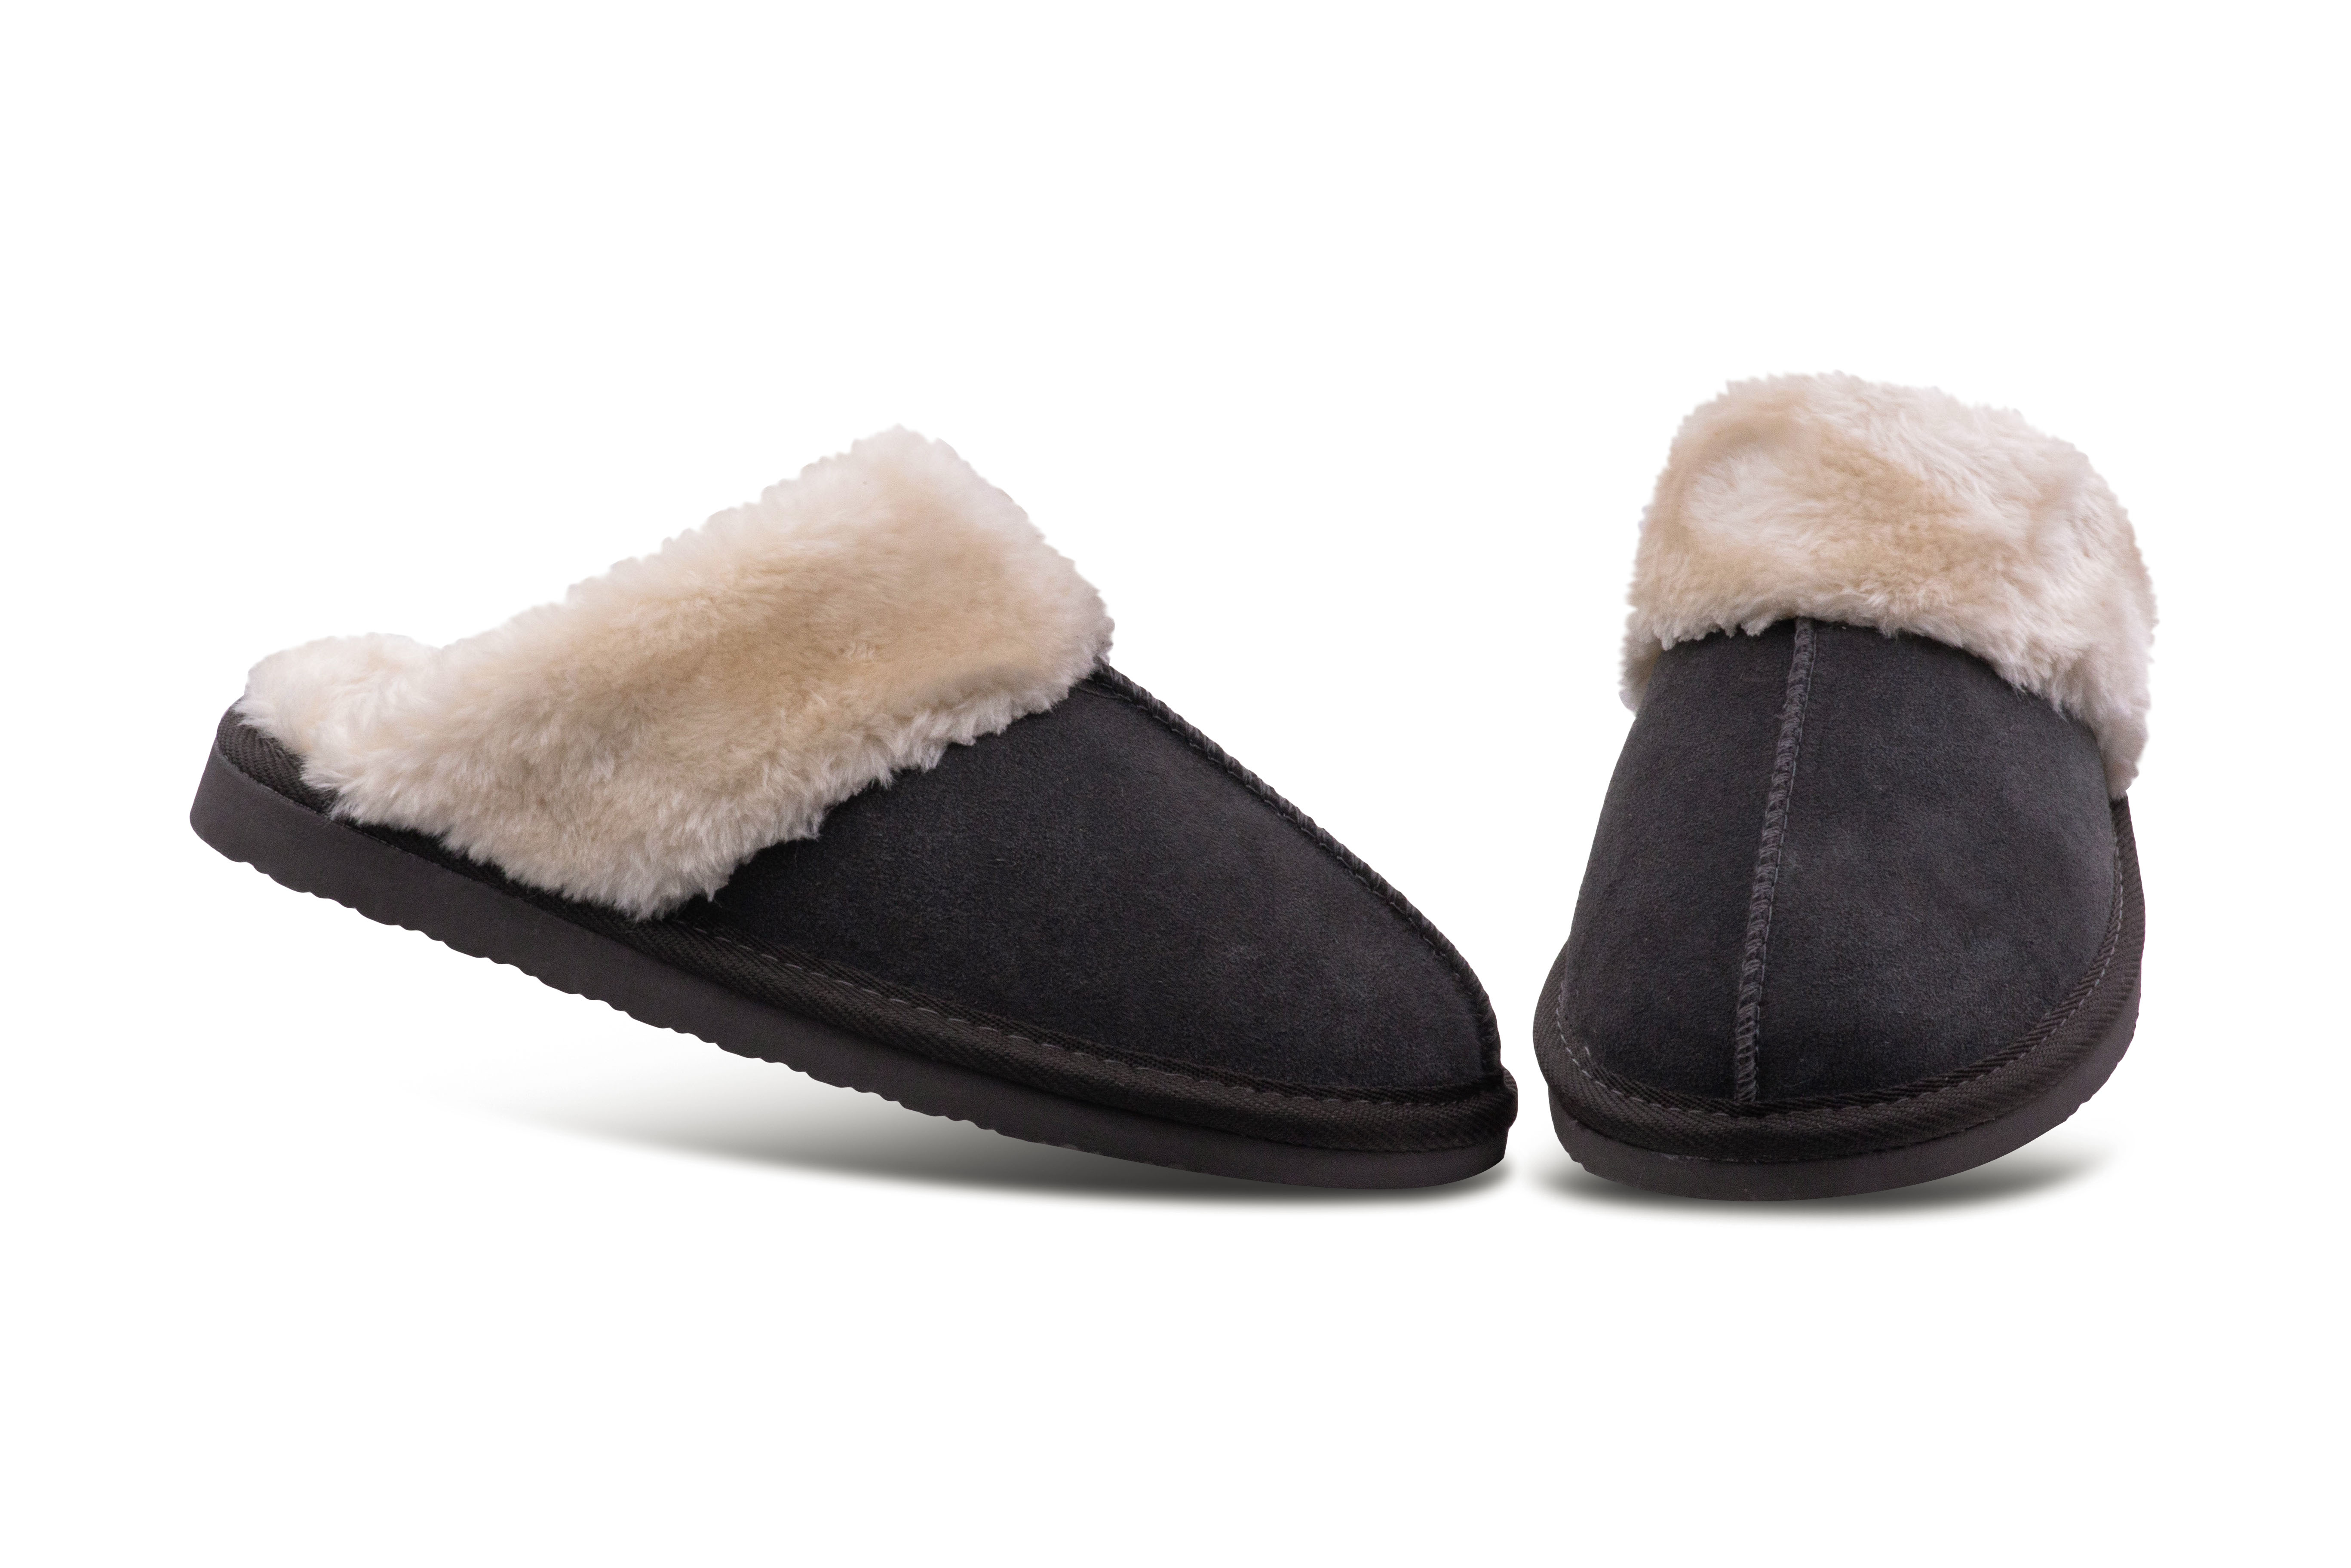 Minnetonka Womens Chesney Fur Lined Slippers - Charcoal - Size 9